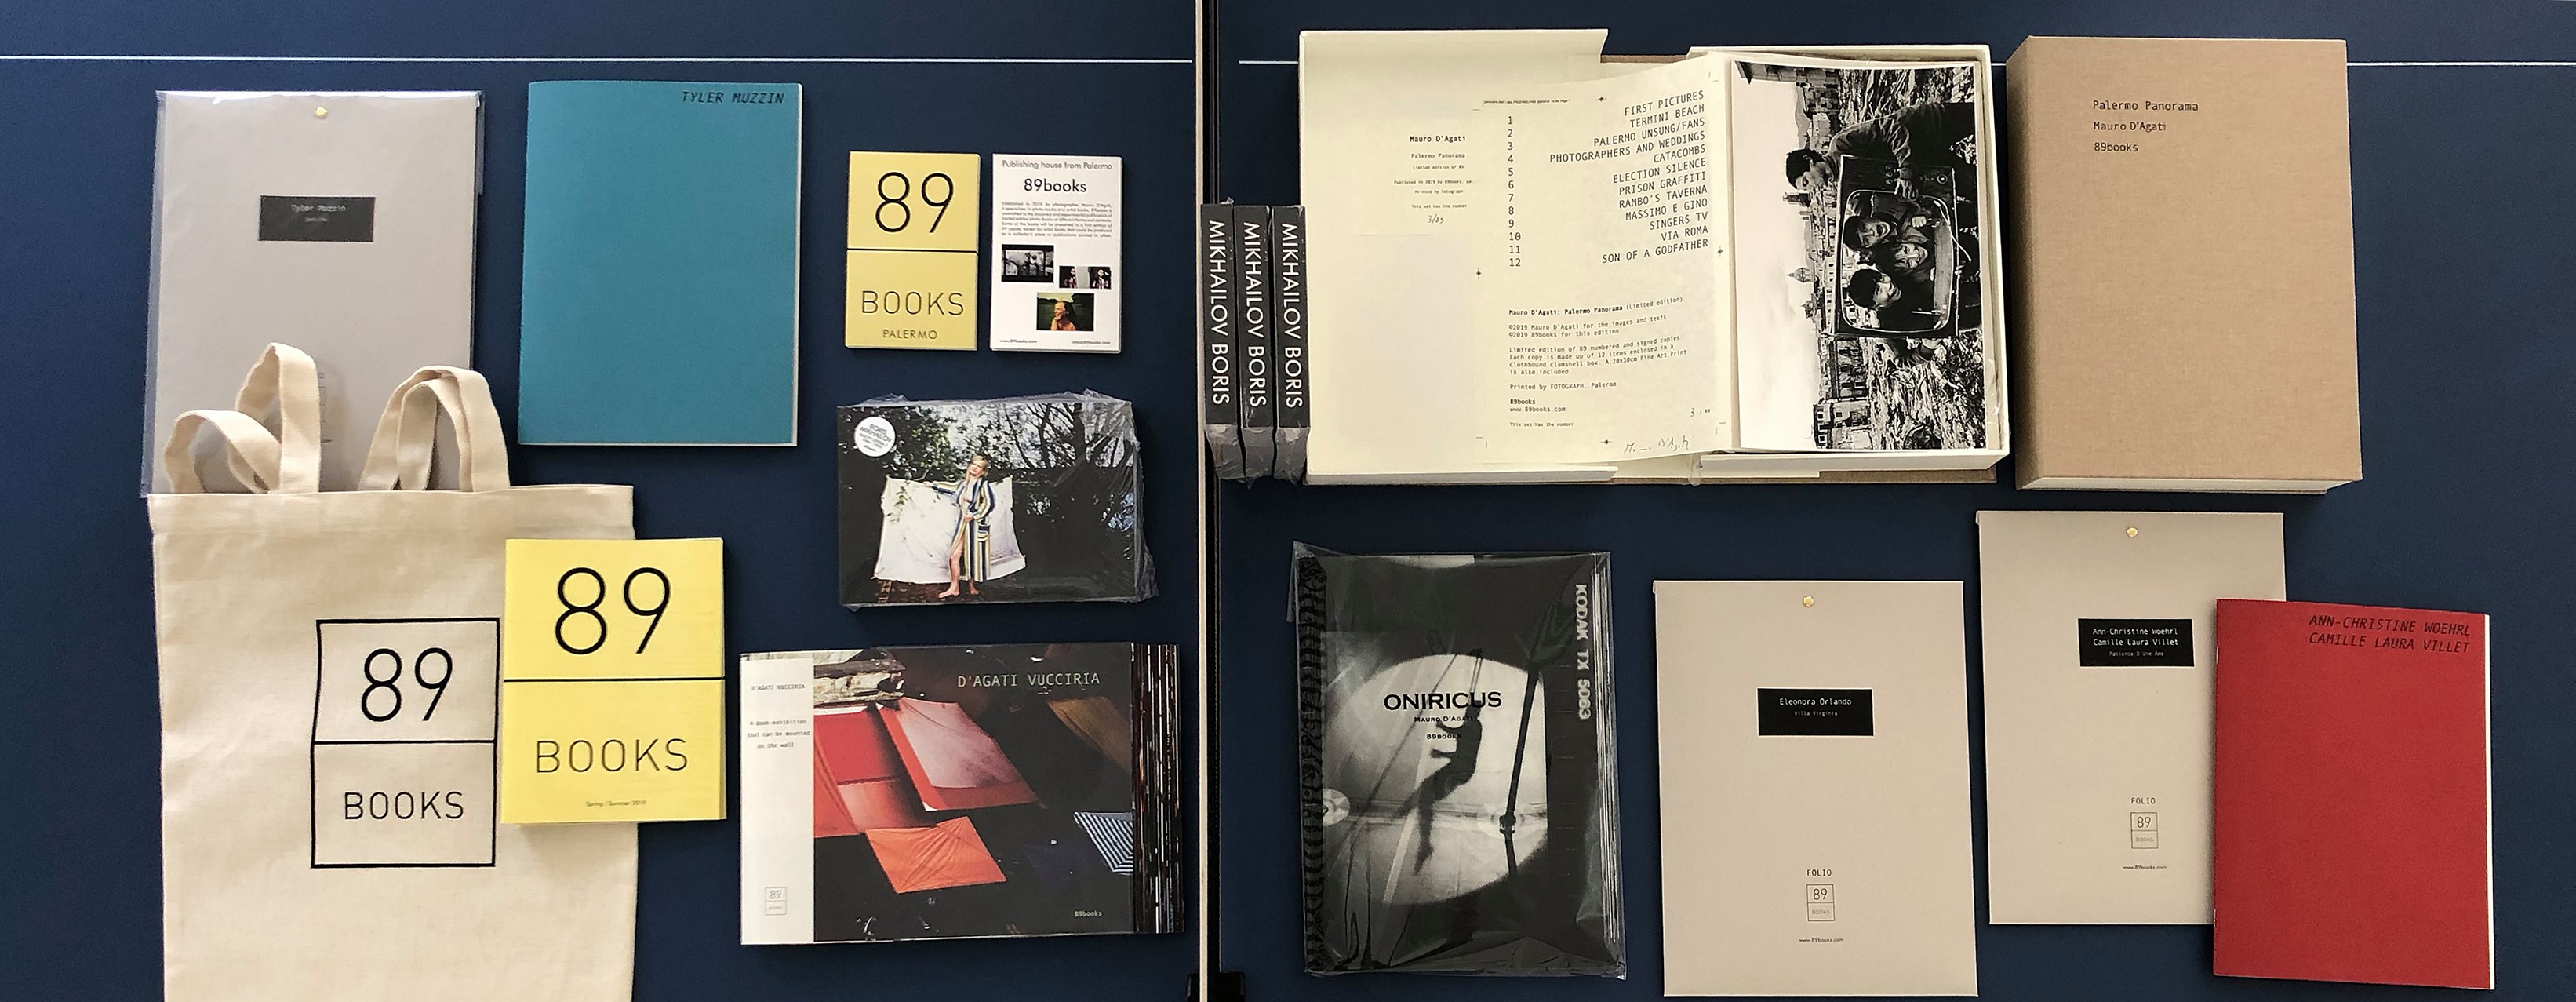 89books goes to Berlin for MISS READ Art Book Festival 2019